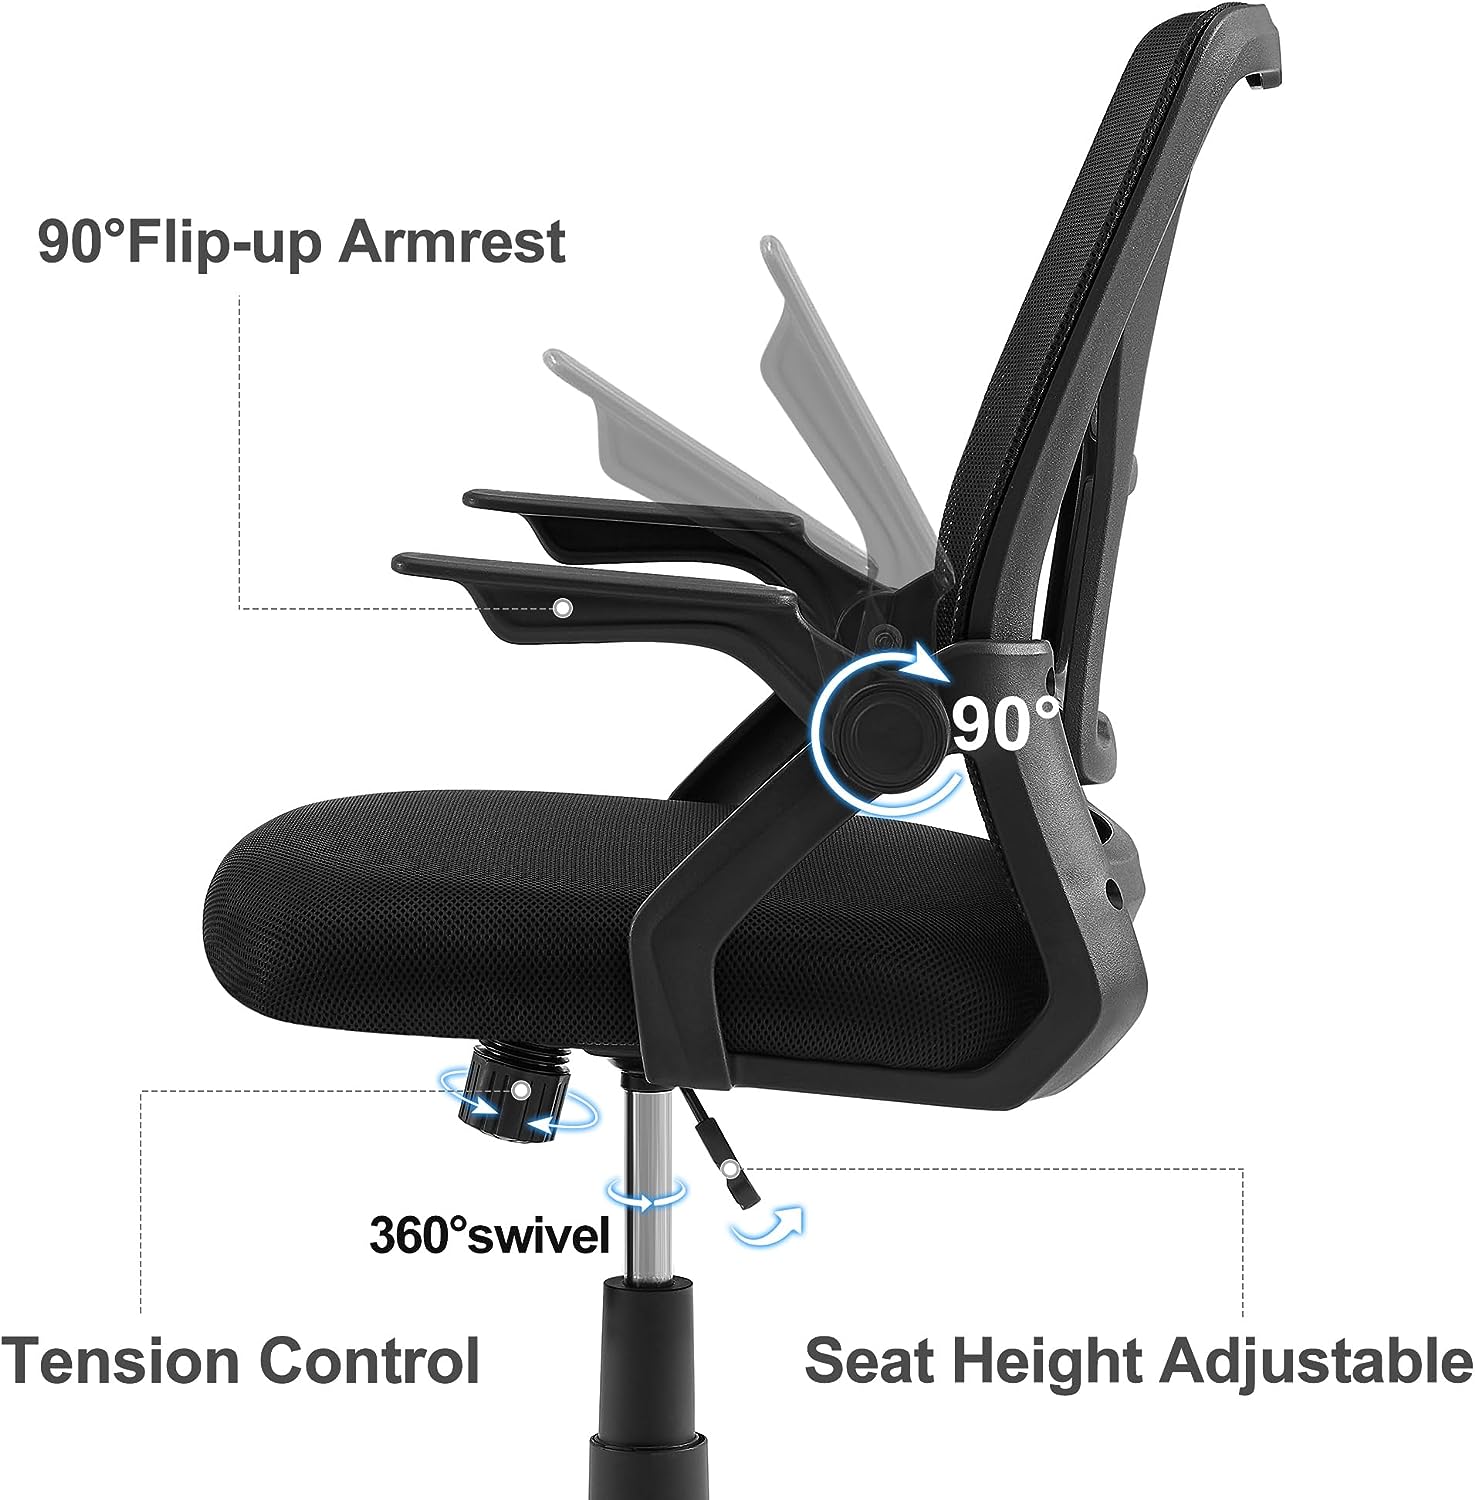 VECELO Mid-Back Swivel Ergonomic Office Chair with Adjustable Arms Mesh Lumbar Support for Computer Task Work